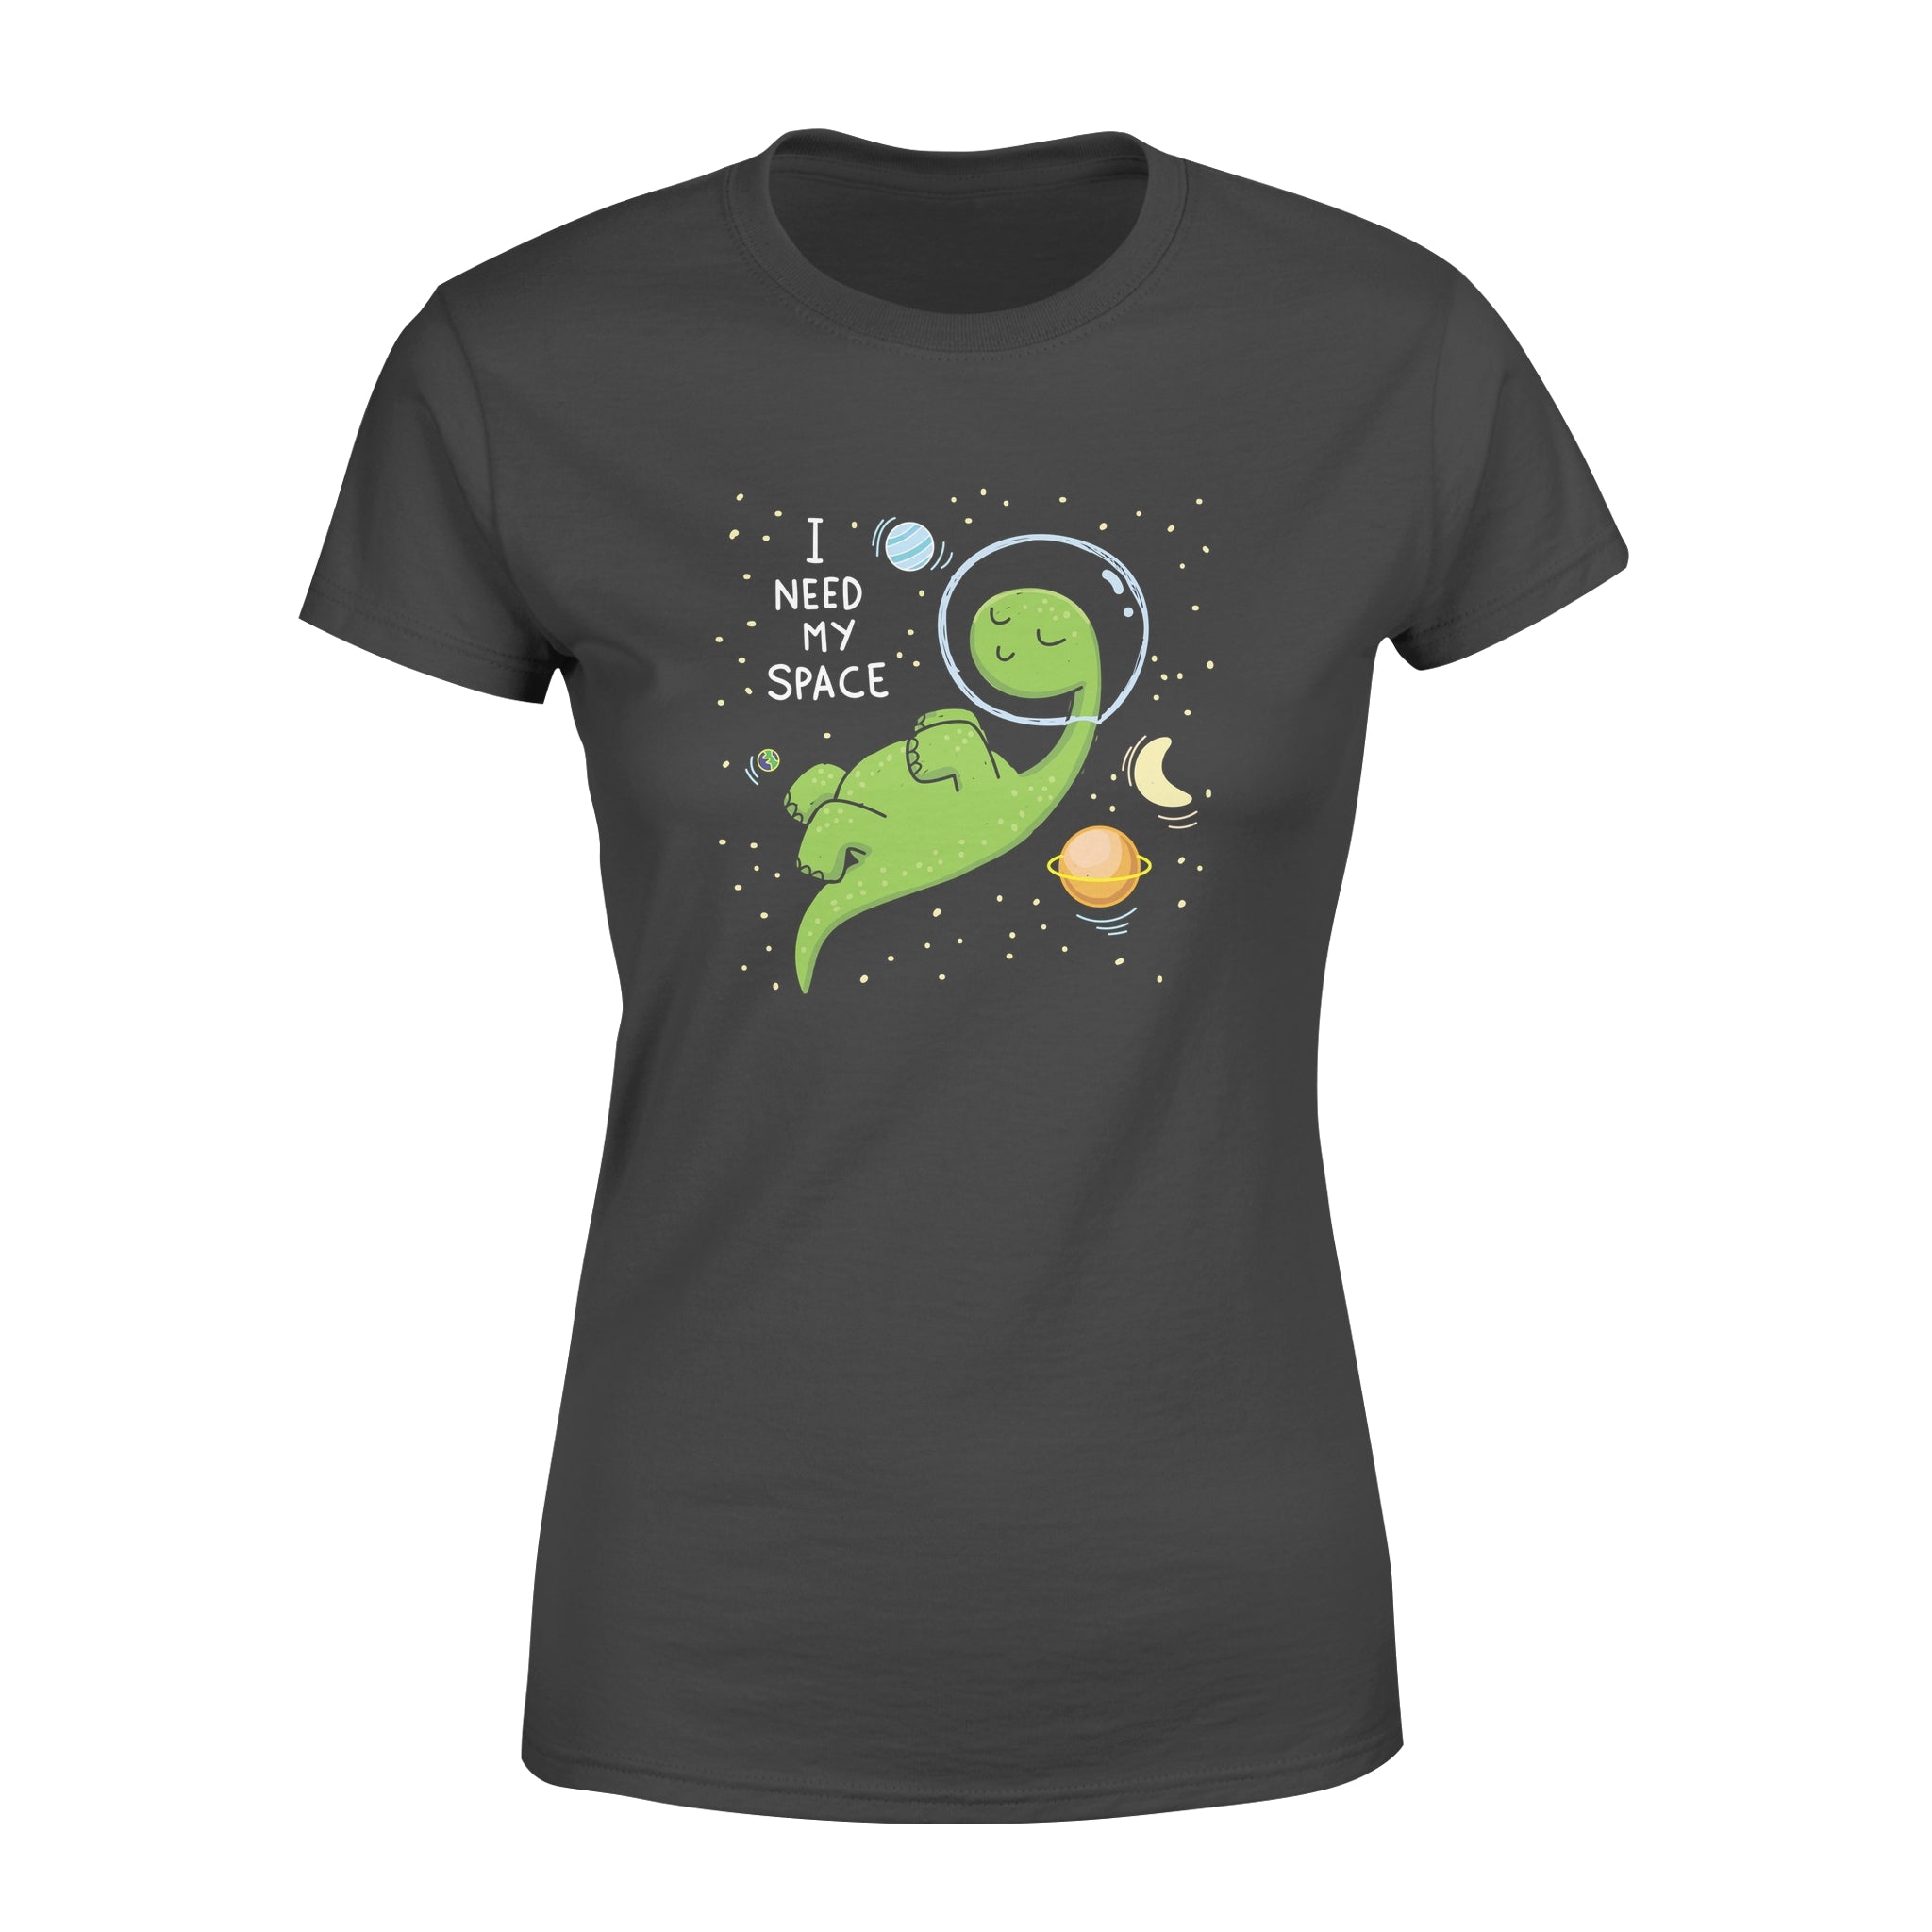 I need more space -  Women's T-shirt